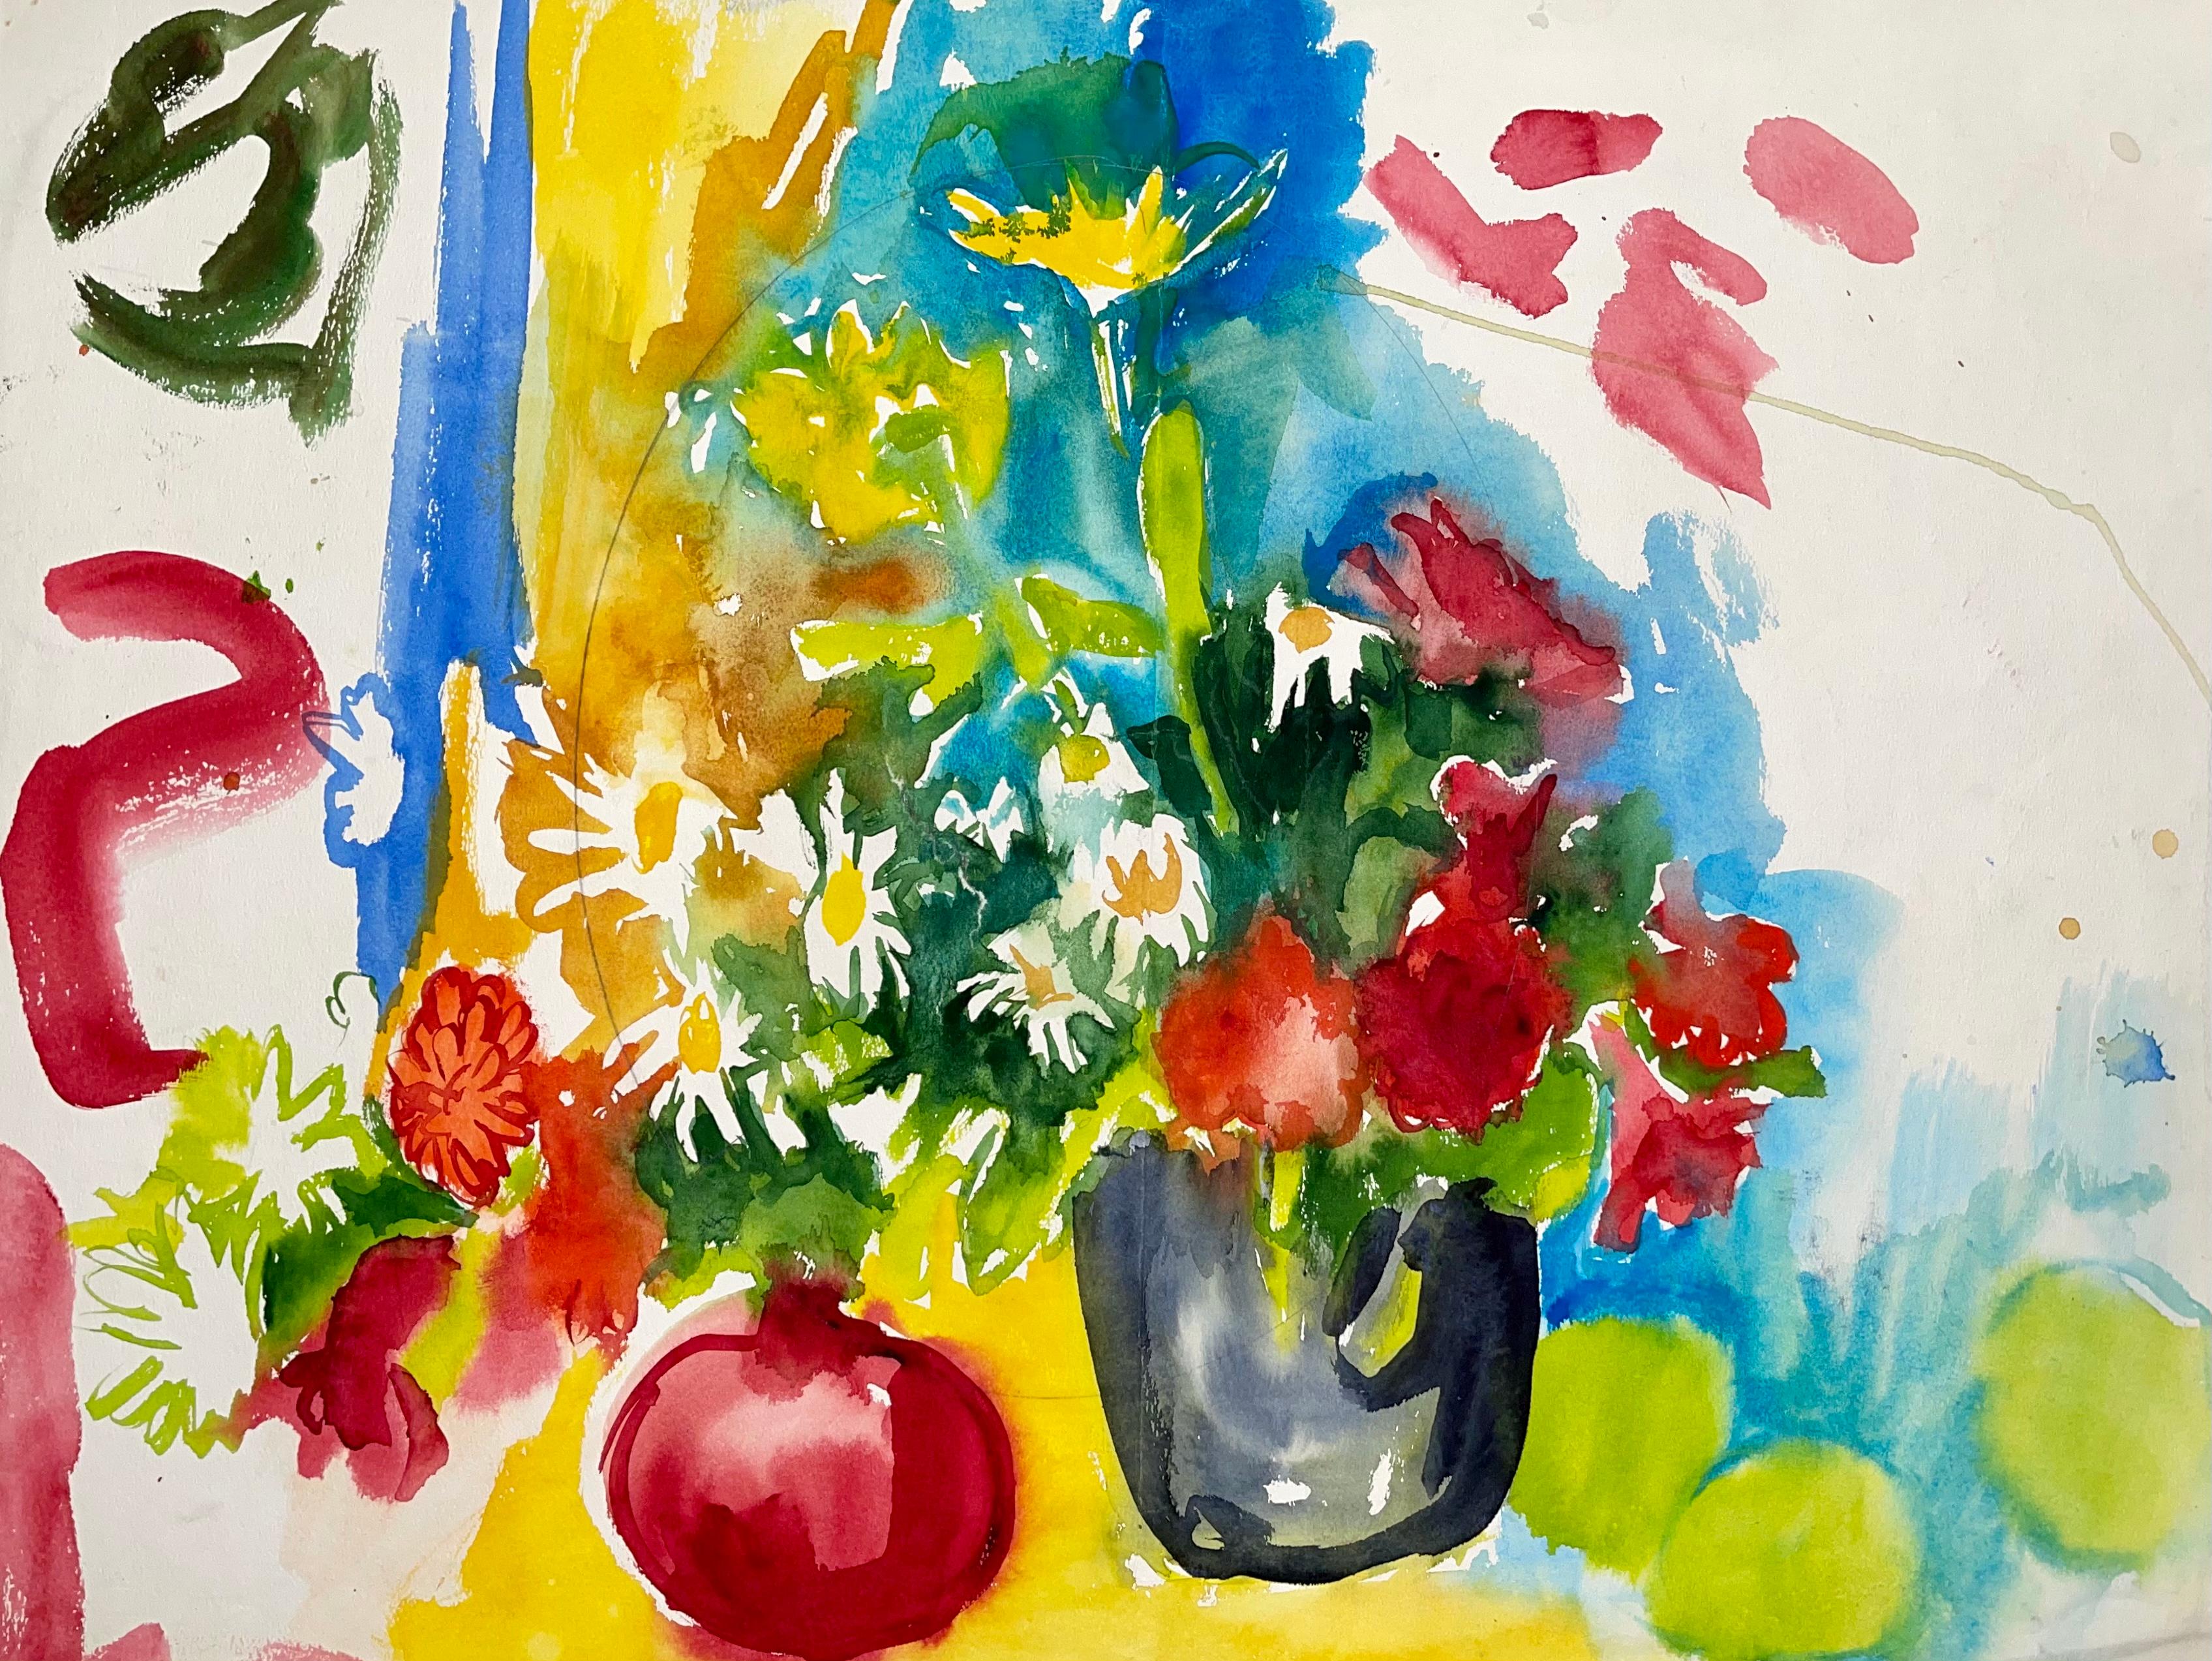 Untitled (Abstract Still Life with Flowers and Fruit)